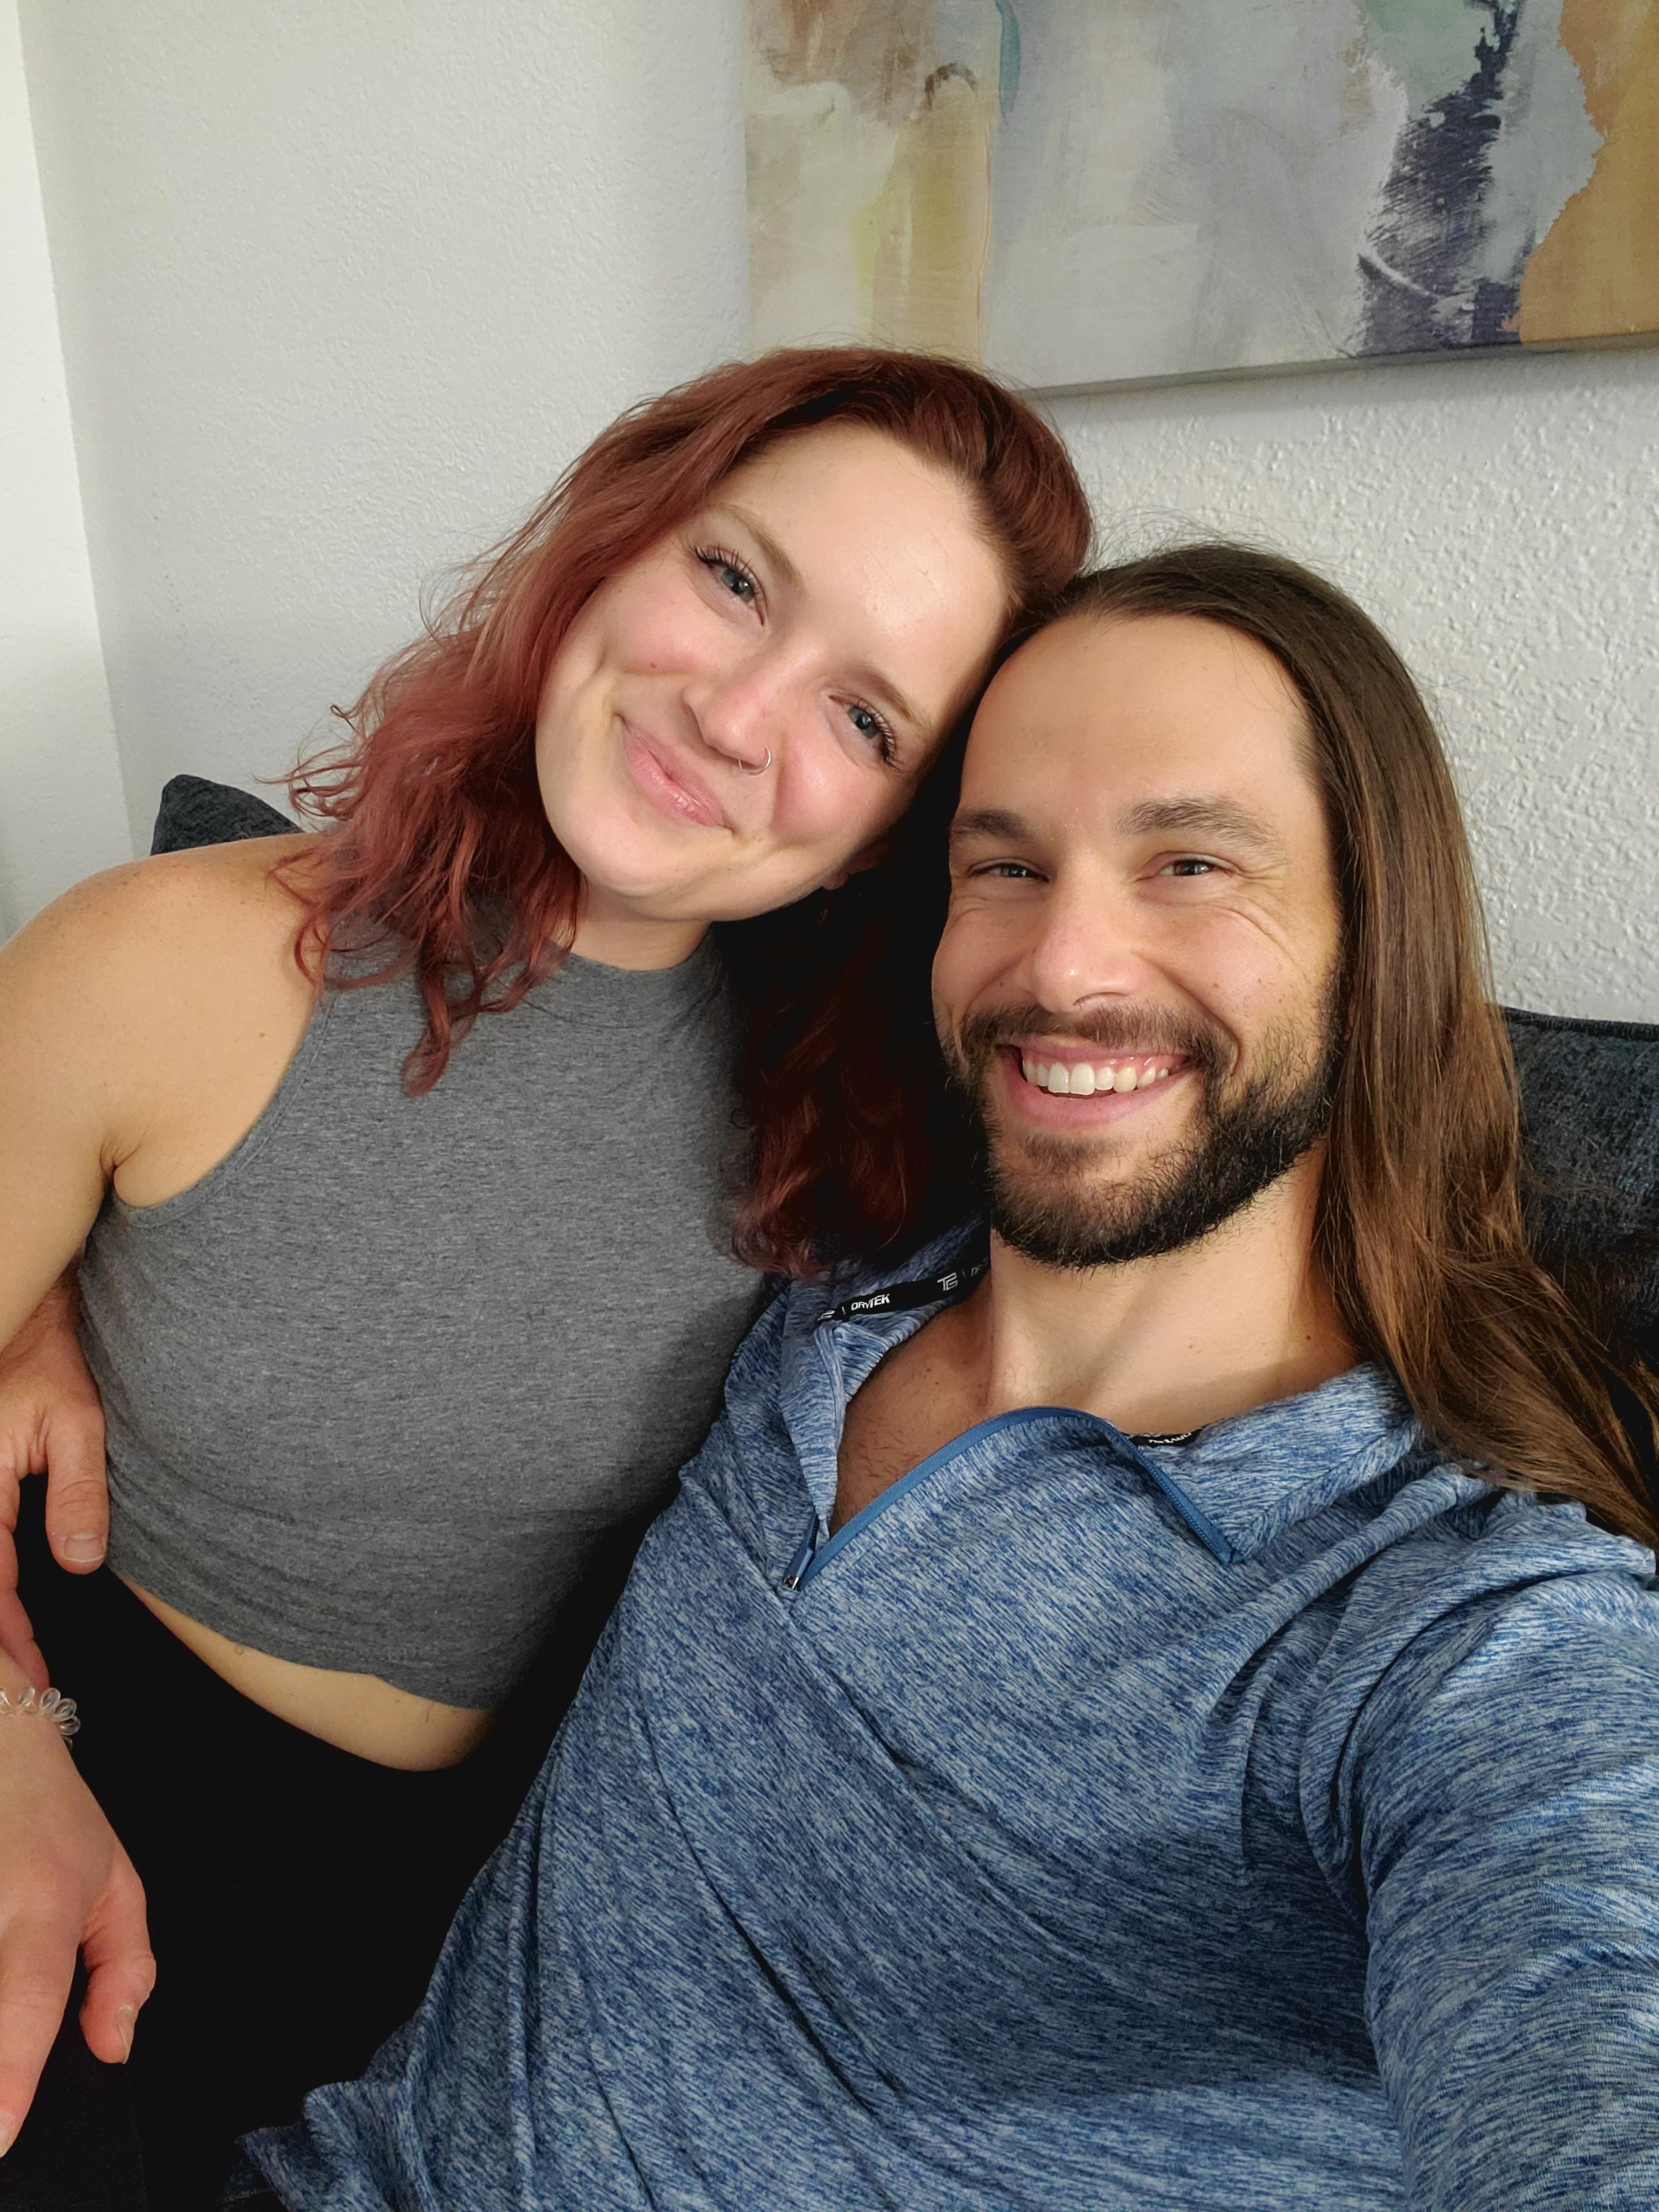 My Fiancé and I Started Camming—People Pay to Watch Us Have Sex